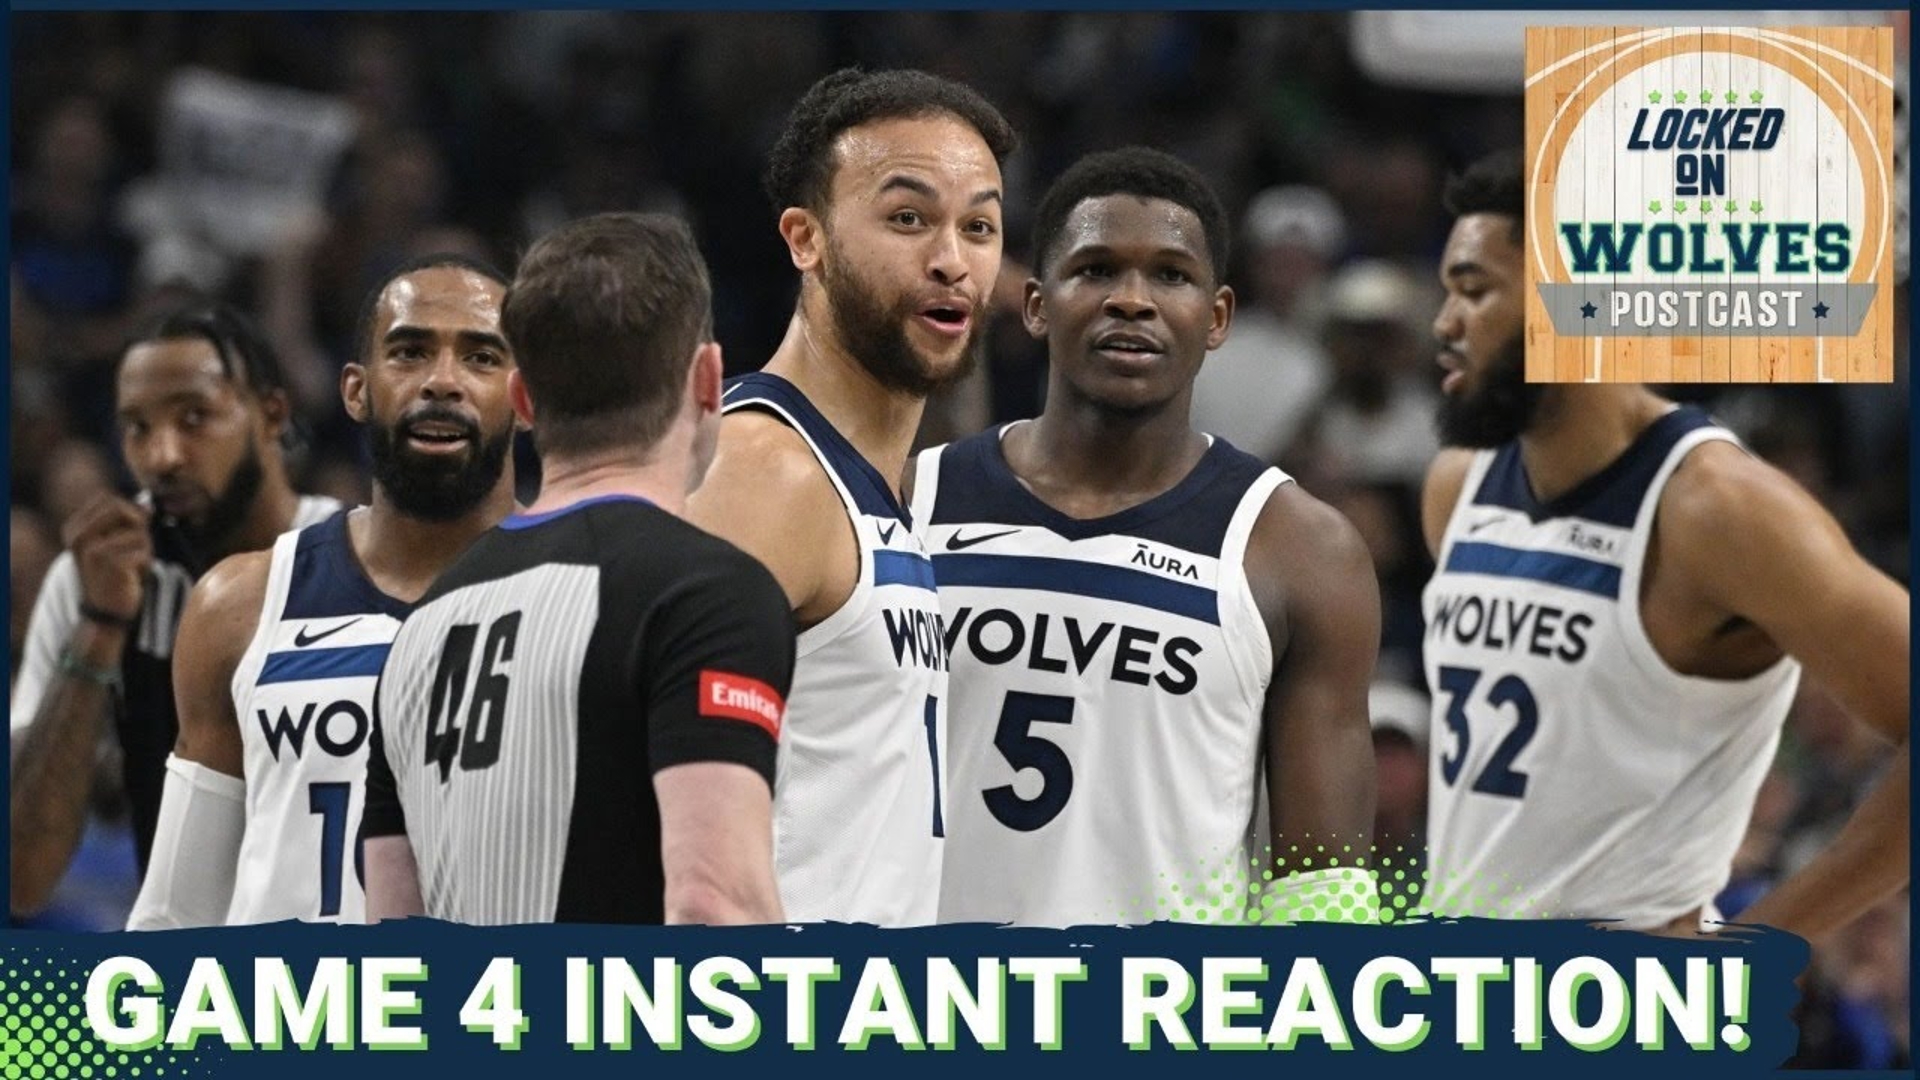 The Minnesota Timberwolves set out to become the first team ever to come back from down three games in the playoffs, and they moved one step closer.